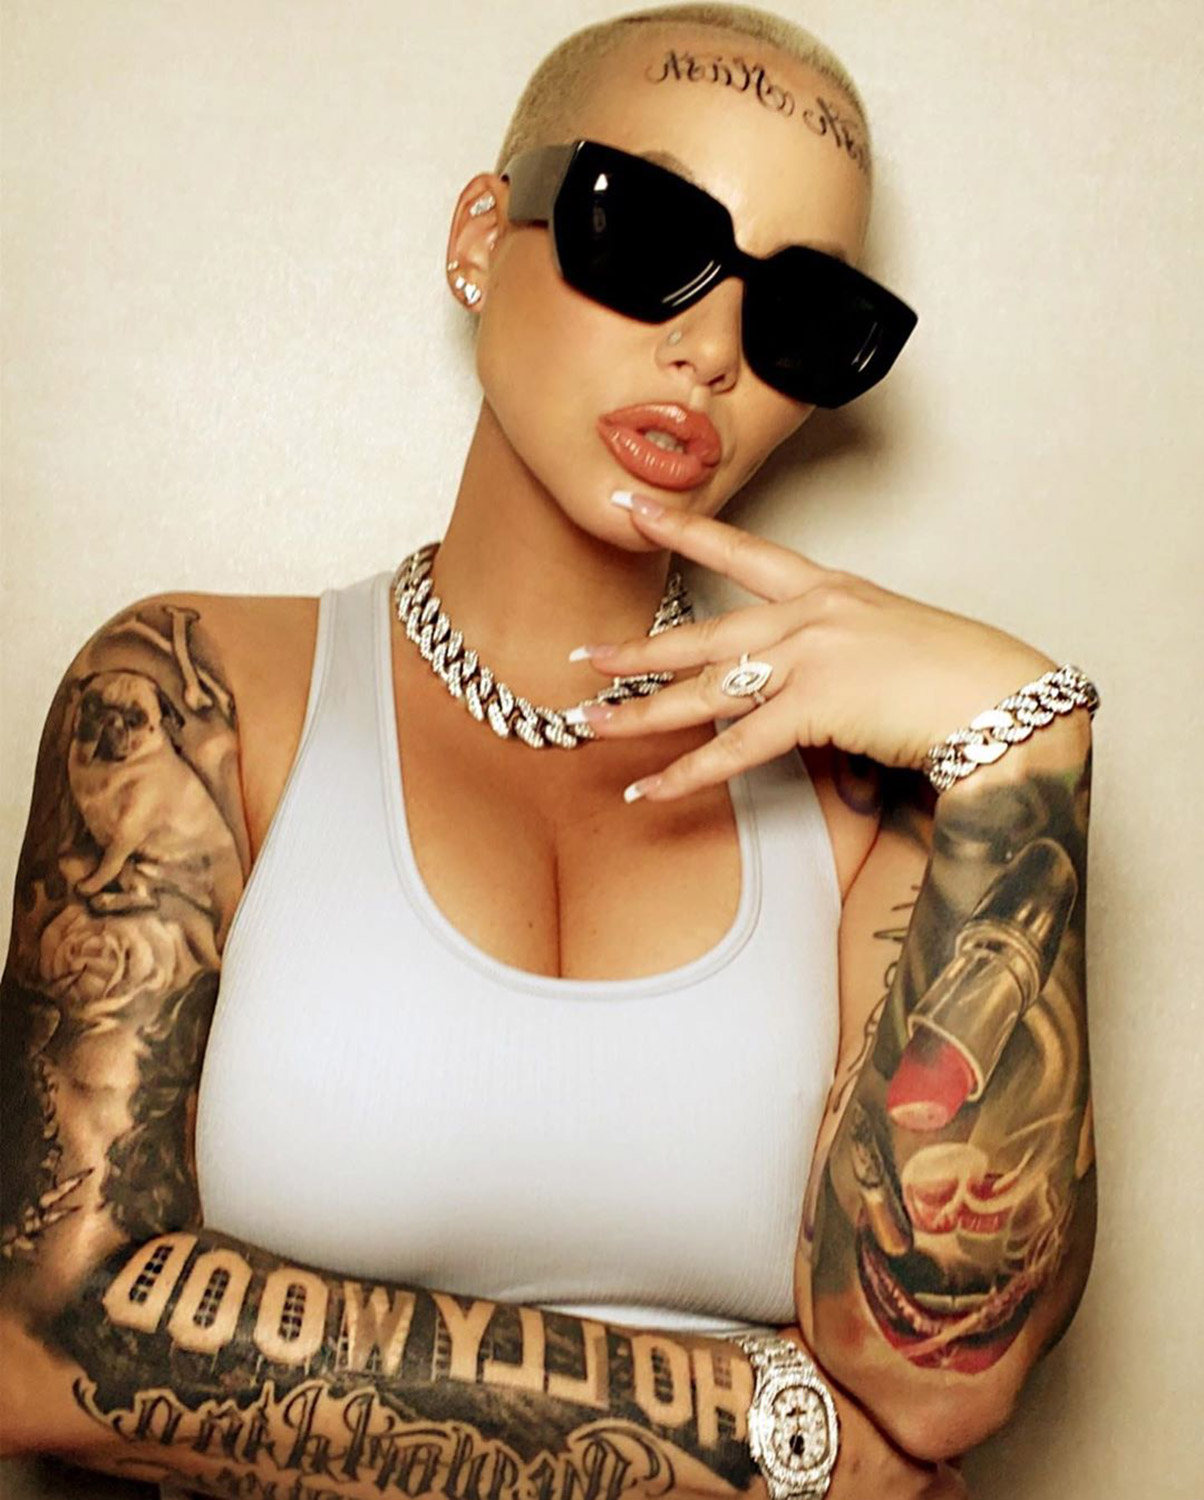 Amber Rose claims she is a “compassionate h*e,” and doesn’t sleep with “married men”